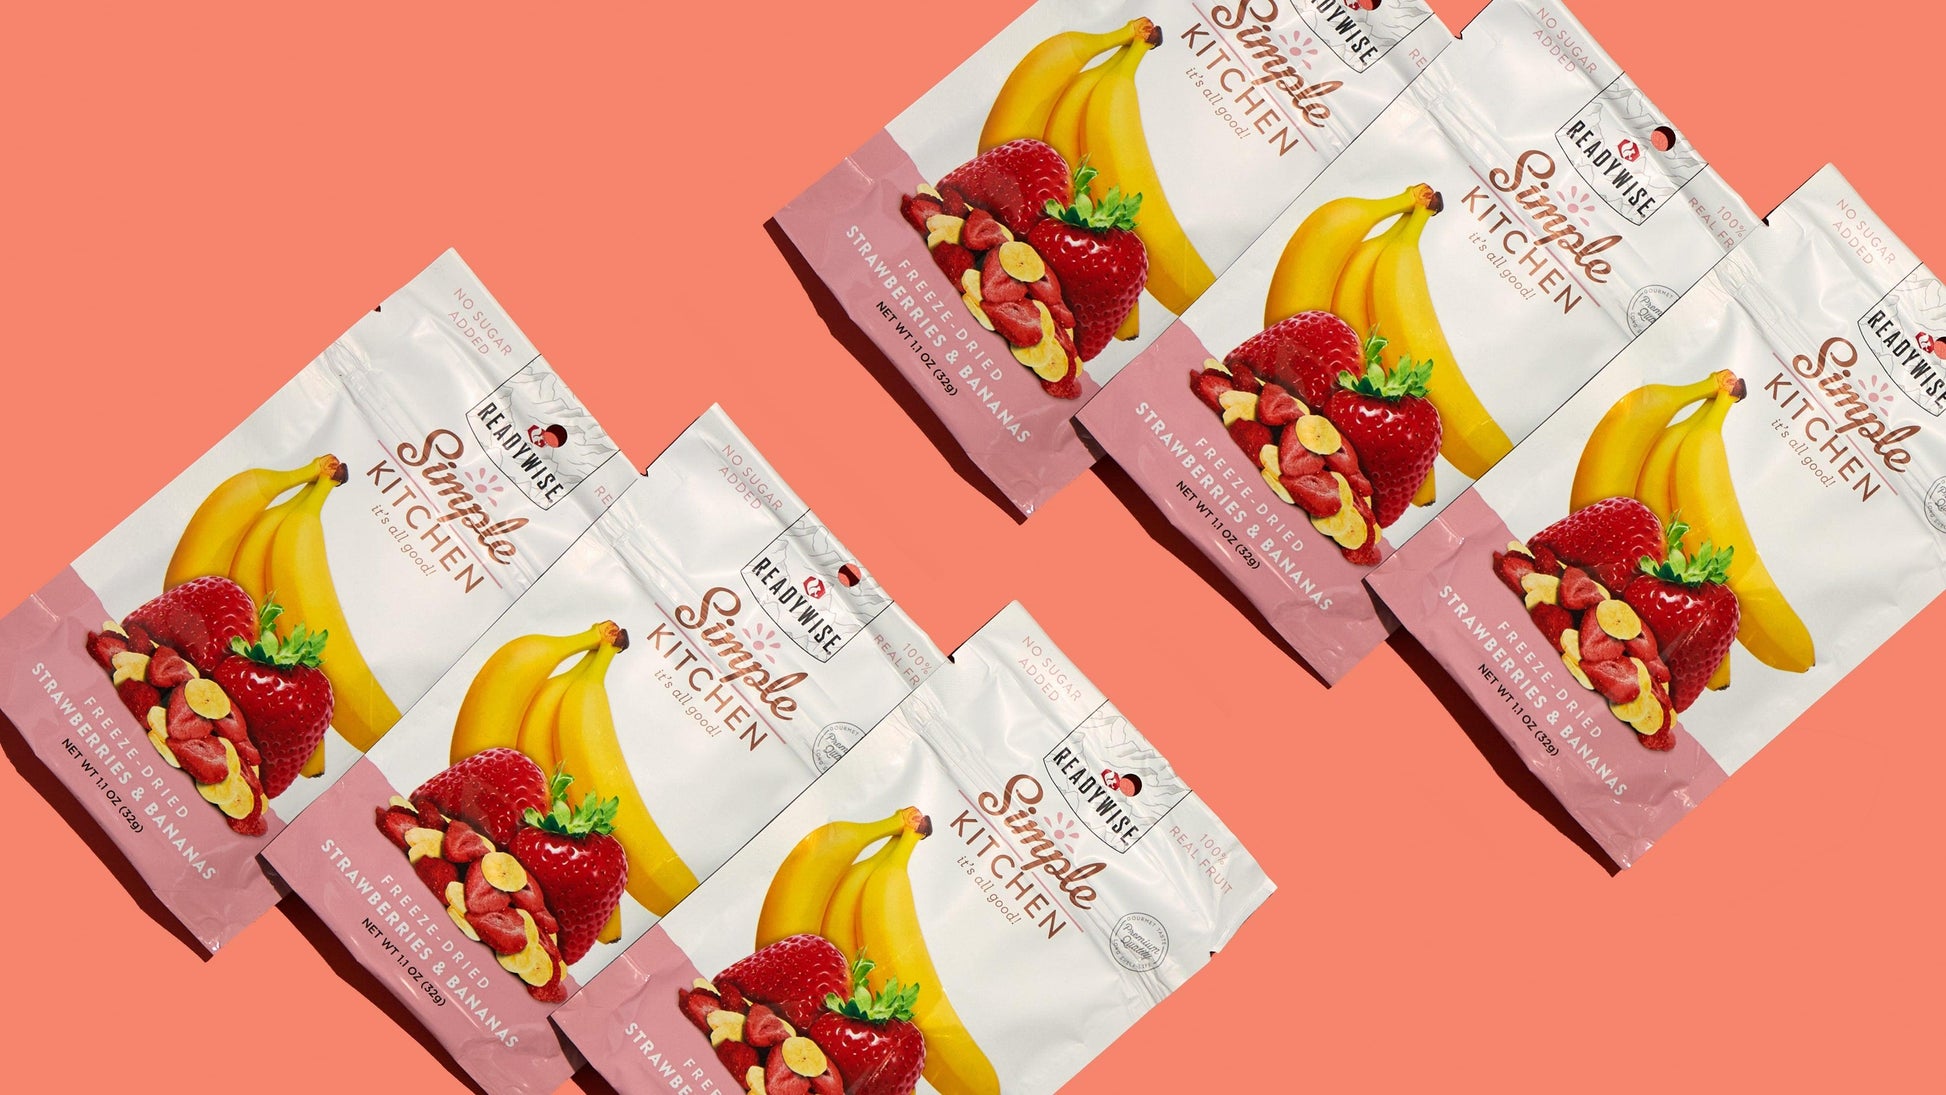 Freeze-Dried Strawberries & Bananas - 6 Pack - Simple Kitchen Foods